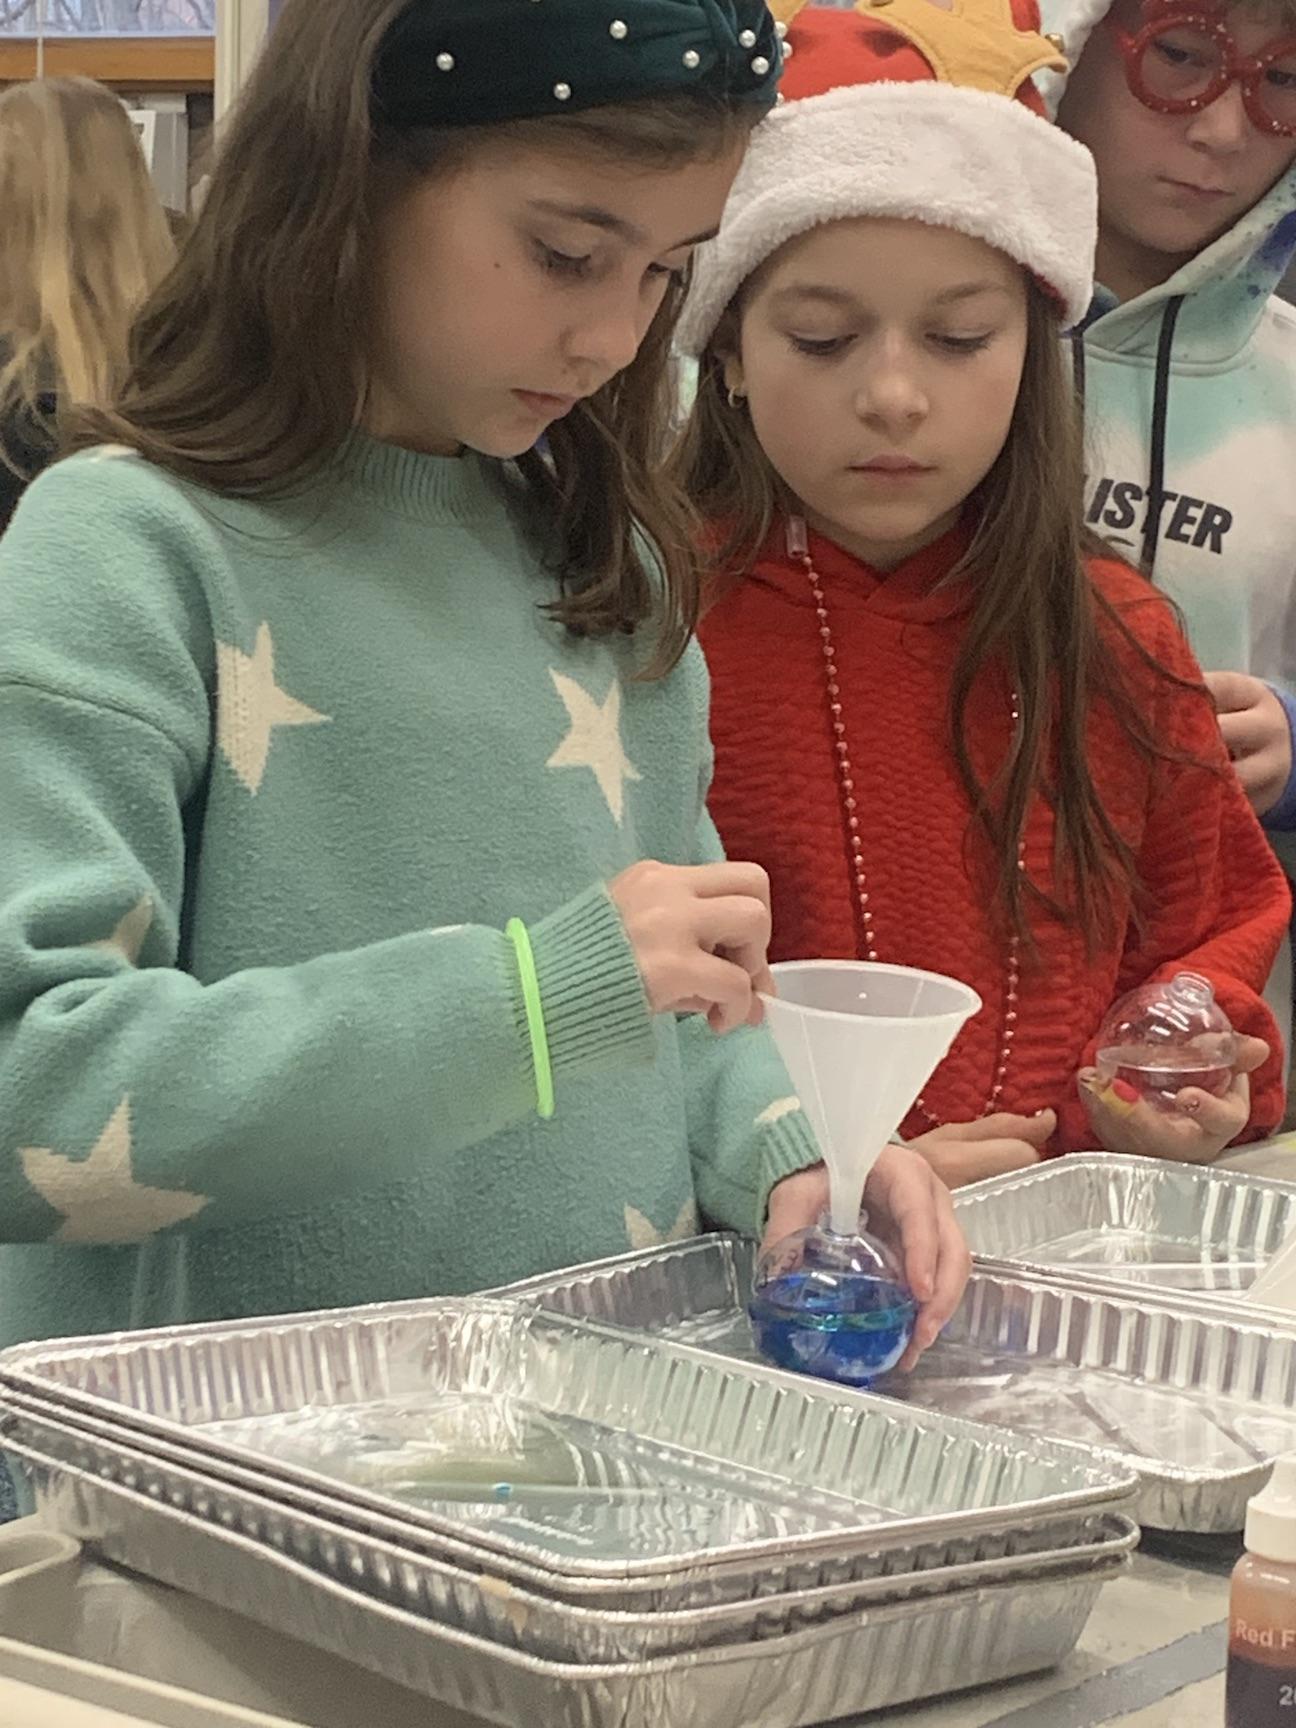 5th-graders Sophia Braun and Evelyn Borst watch the bubbling reaction